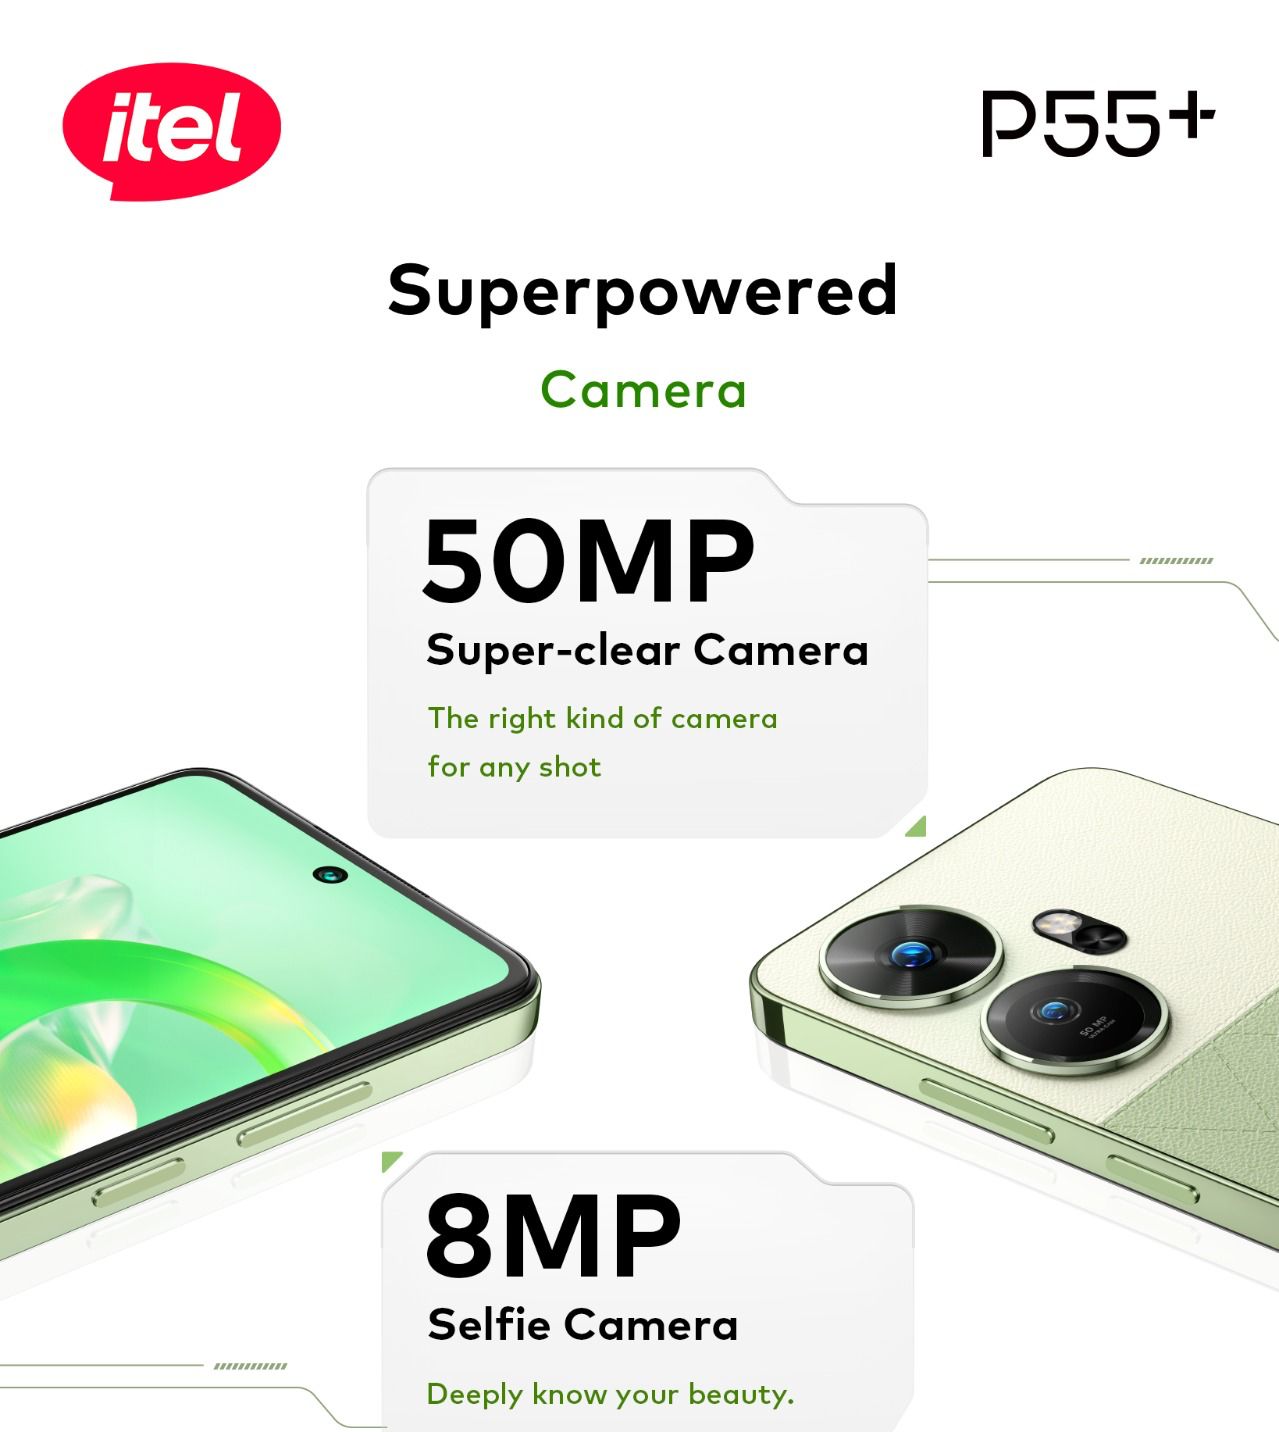 itel P55 and P55+: Features